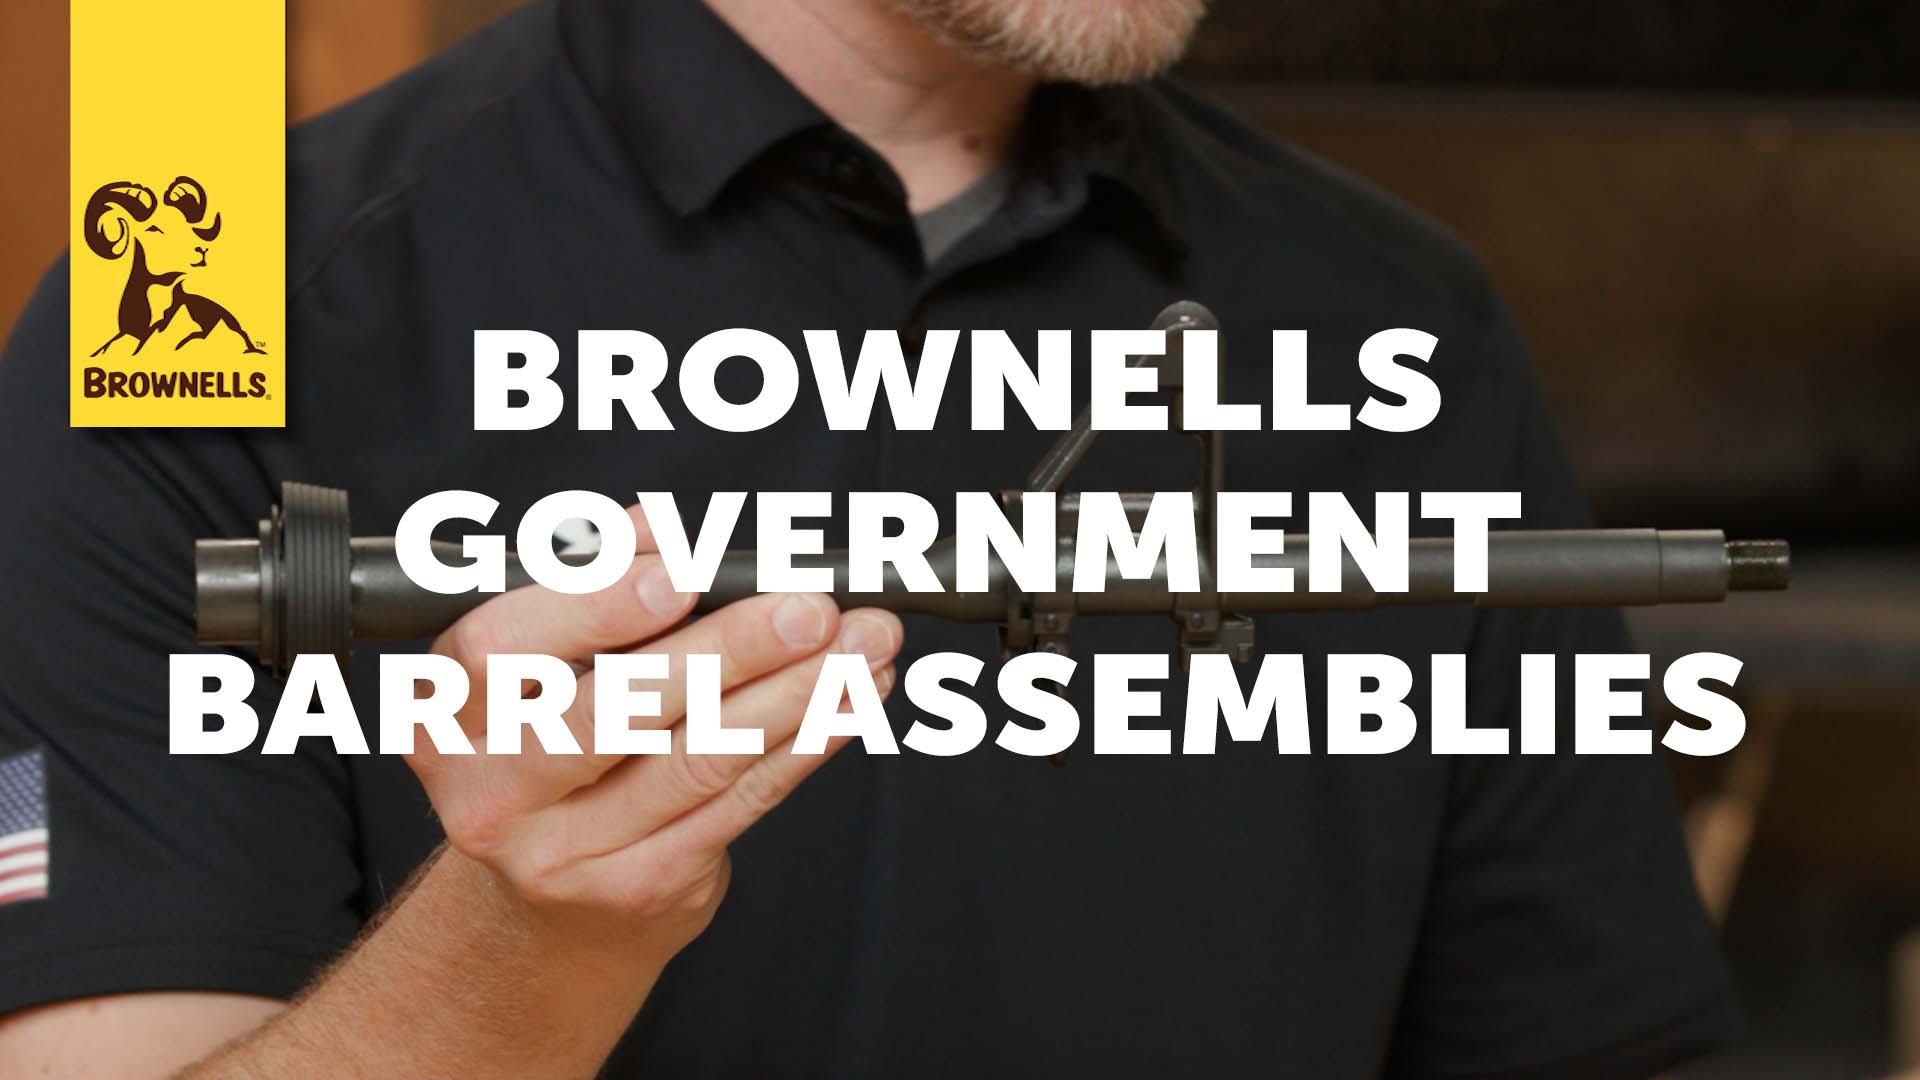 New Products: Brownells Government-Profile AR-15 Barrels